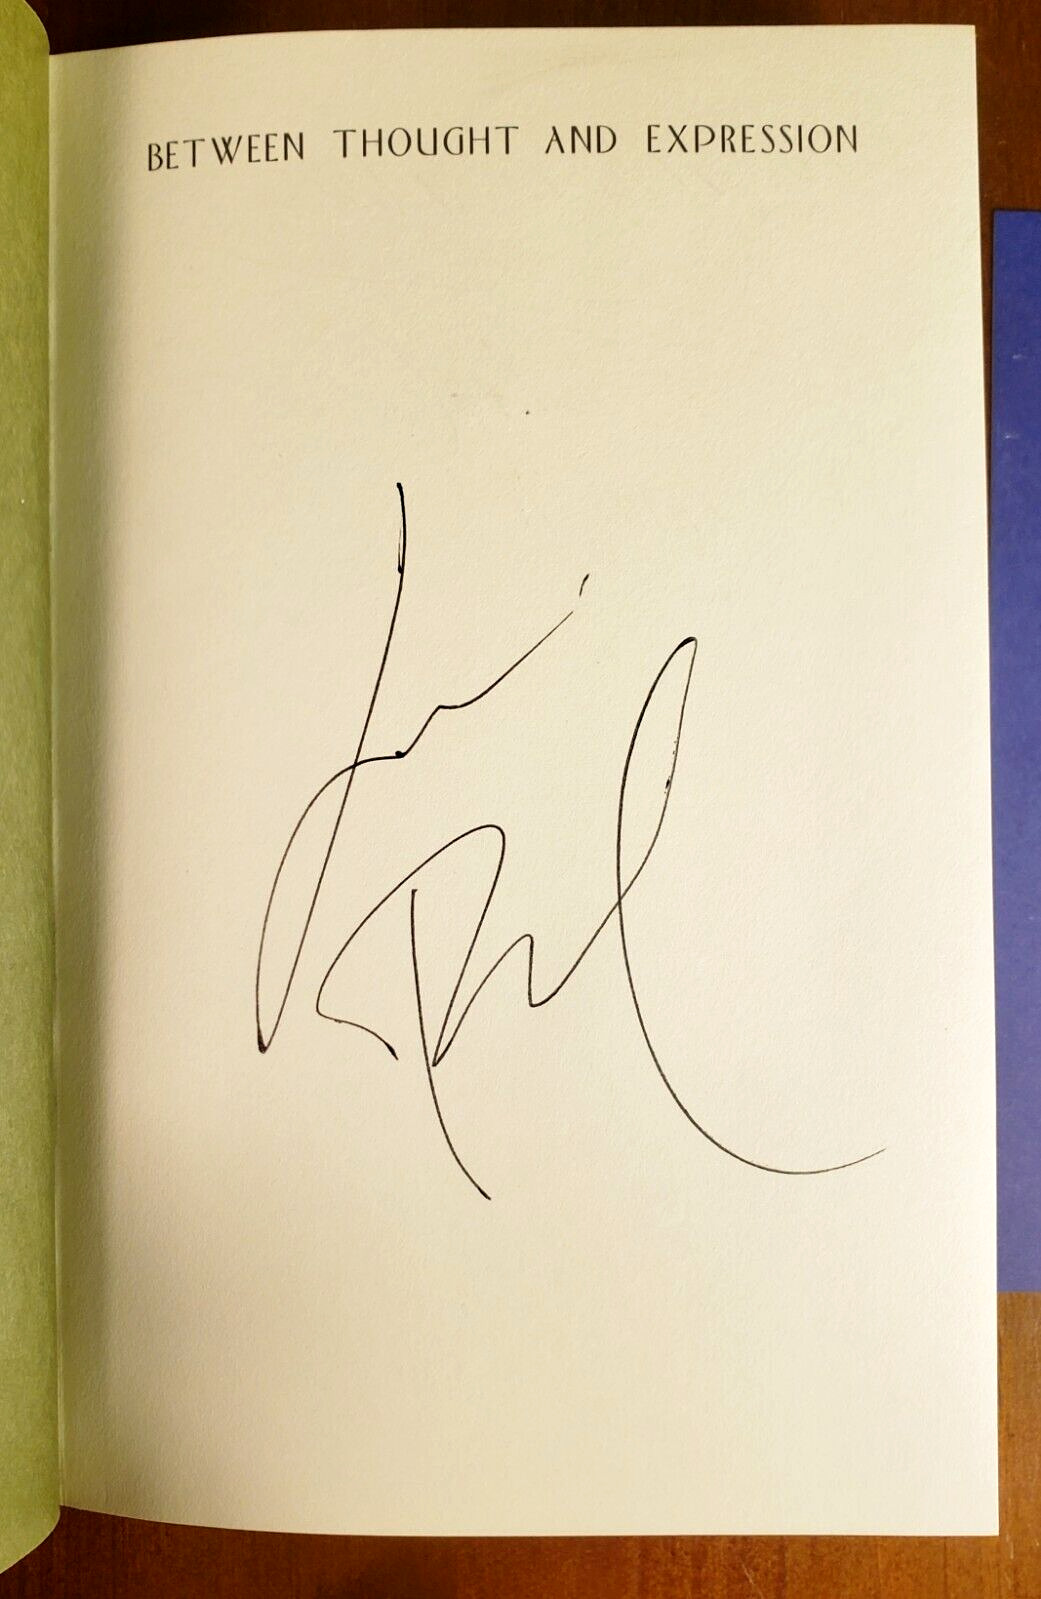 LOU REED SIGNED 'BETWEEN THOUGHT AND EXPRESSION SELECTED LYRICS' HARD COVER BOOK